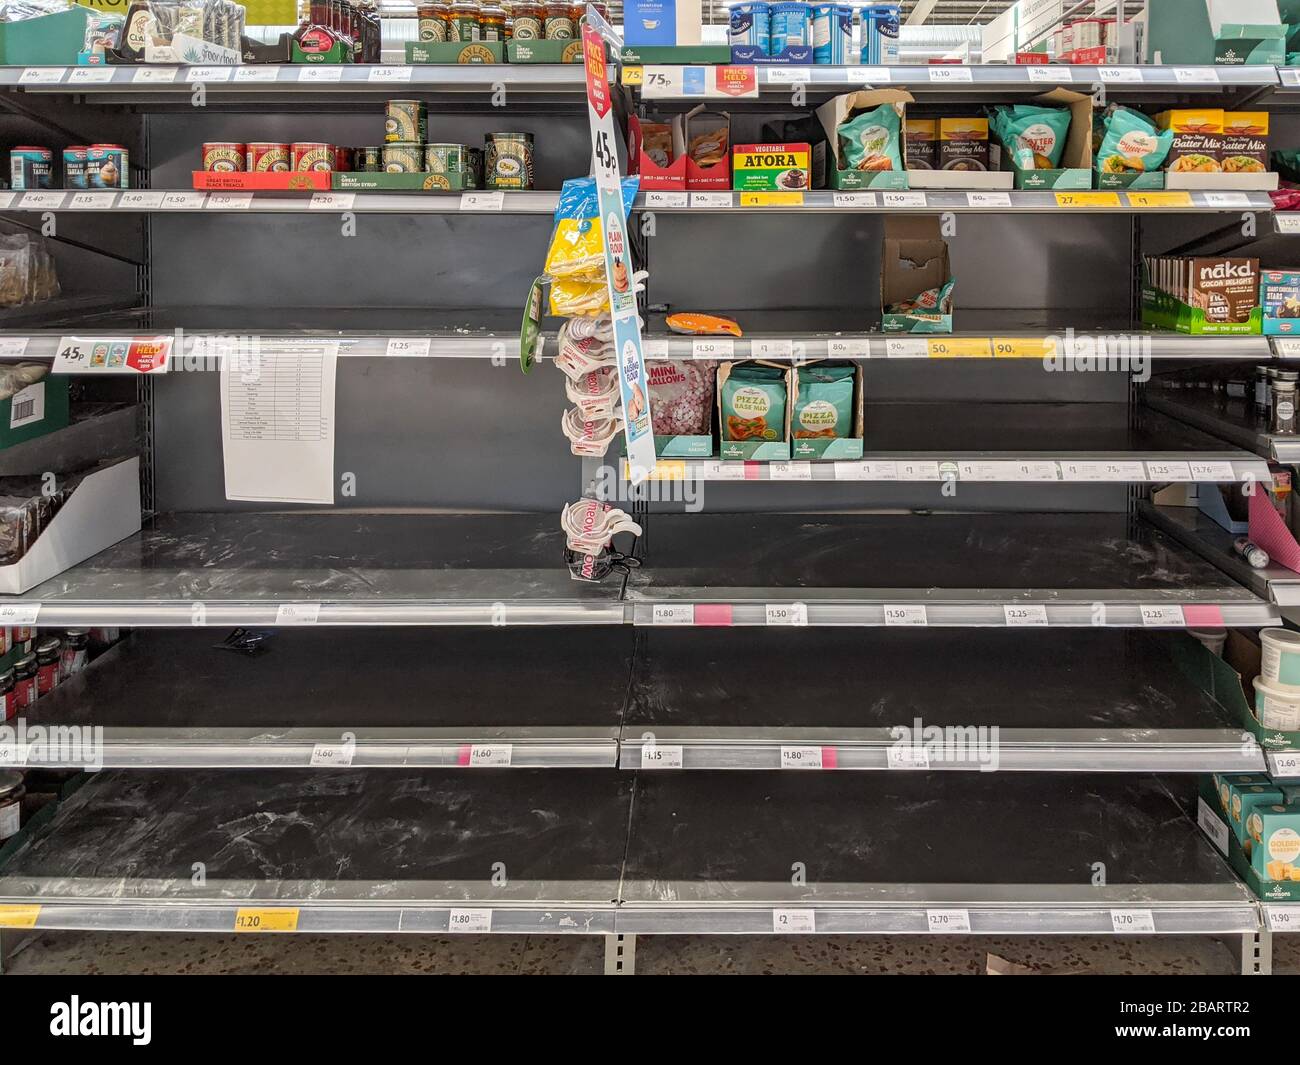 Flour aisle empty in Morrisons supermarket as shoppers wipe out some food section as panic buy Stock Photo